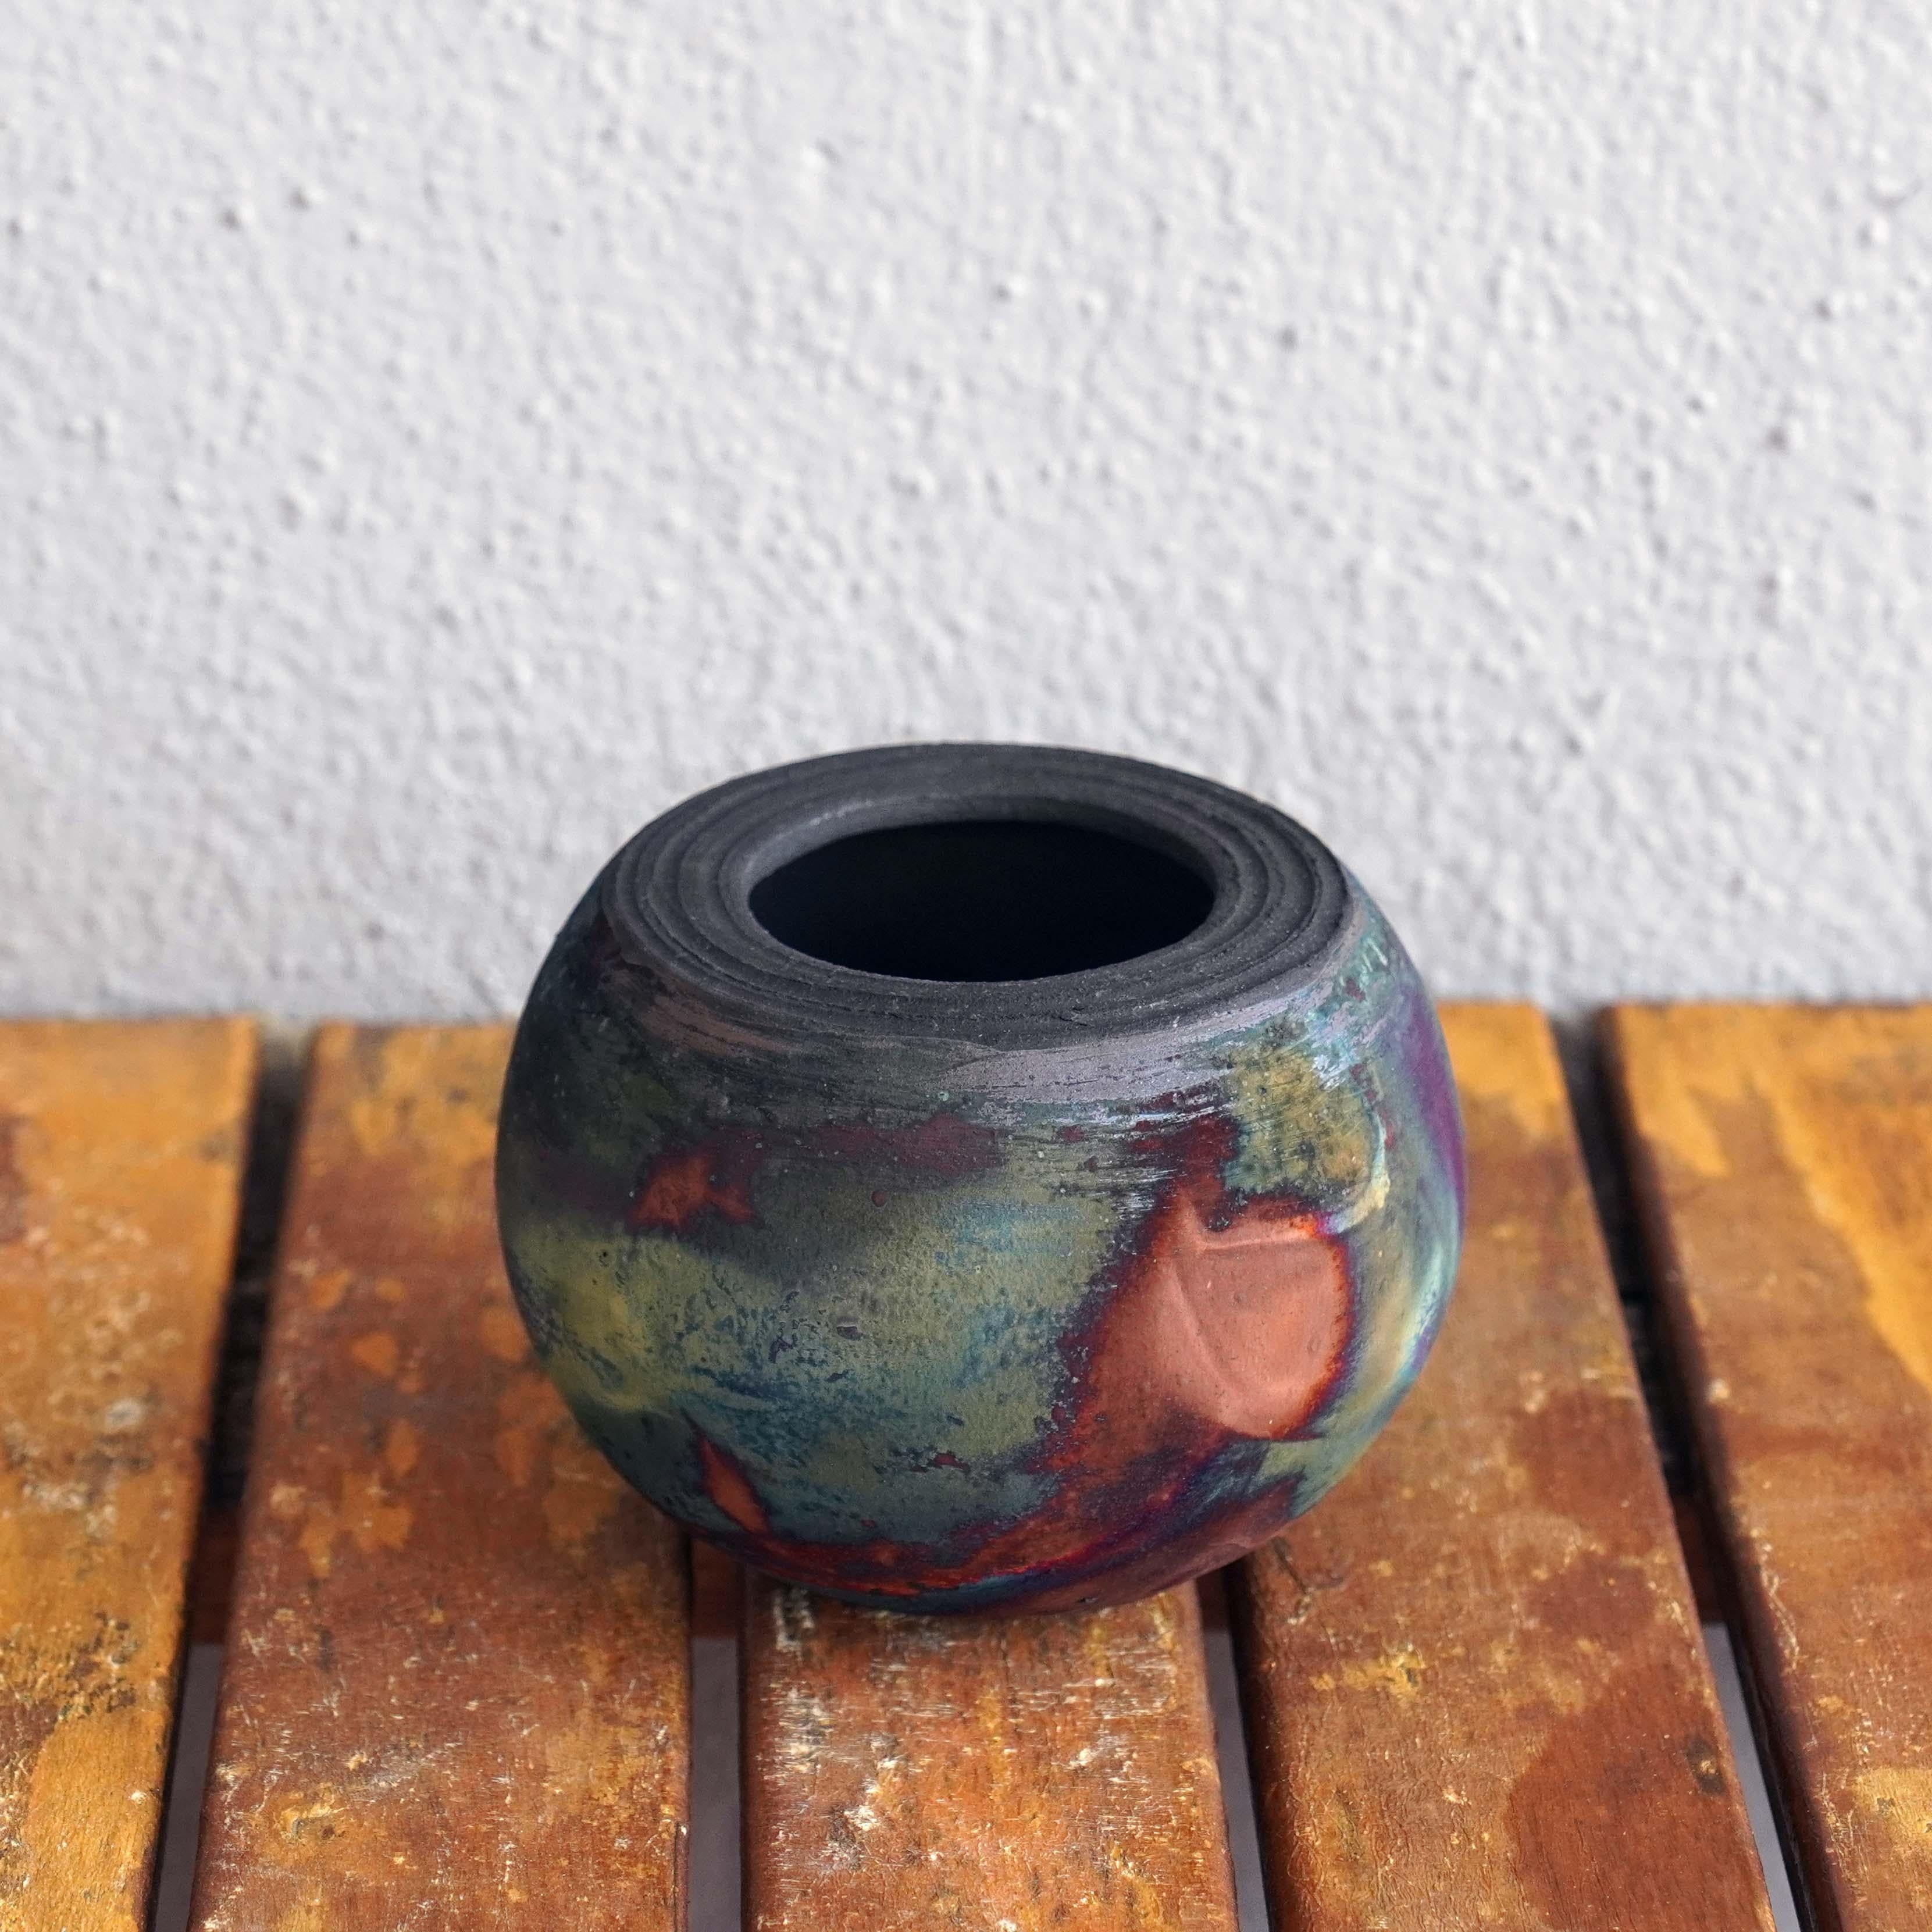 Nikko ( 日光 ) - (n) sunlight

Our Nikko vase is a bulbous little one and perfect for those wanting to decorate small spaces without using up too much space. This vase sports a flattened top and a wide mouth with surrounding rim giving it a different